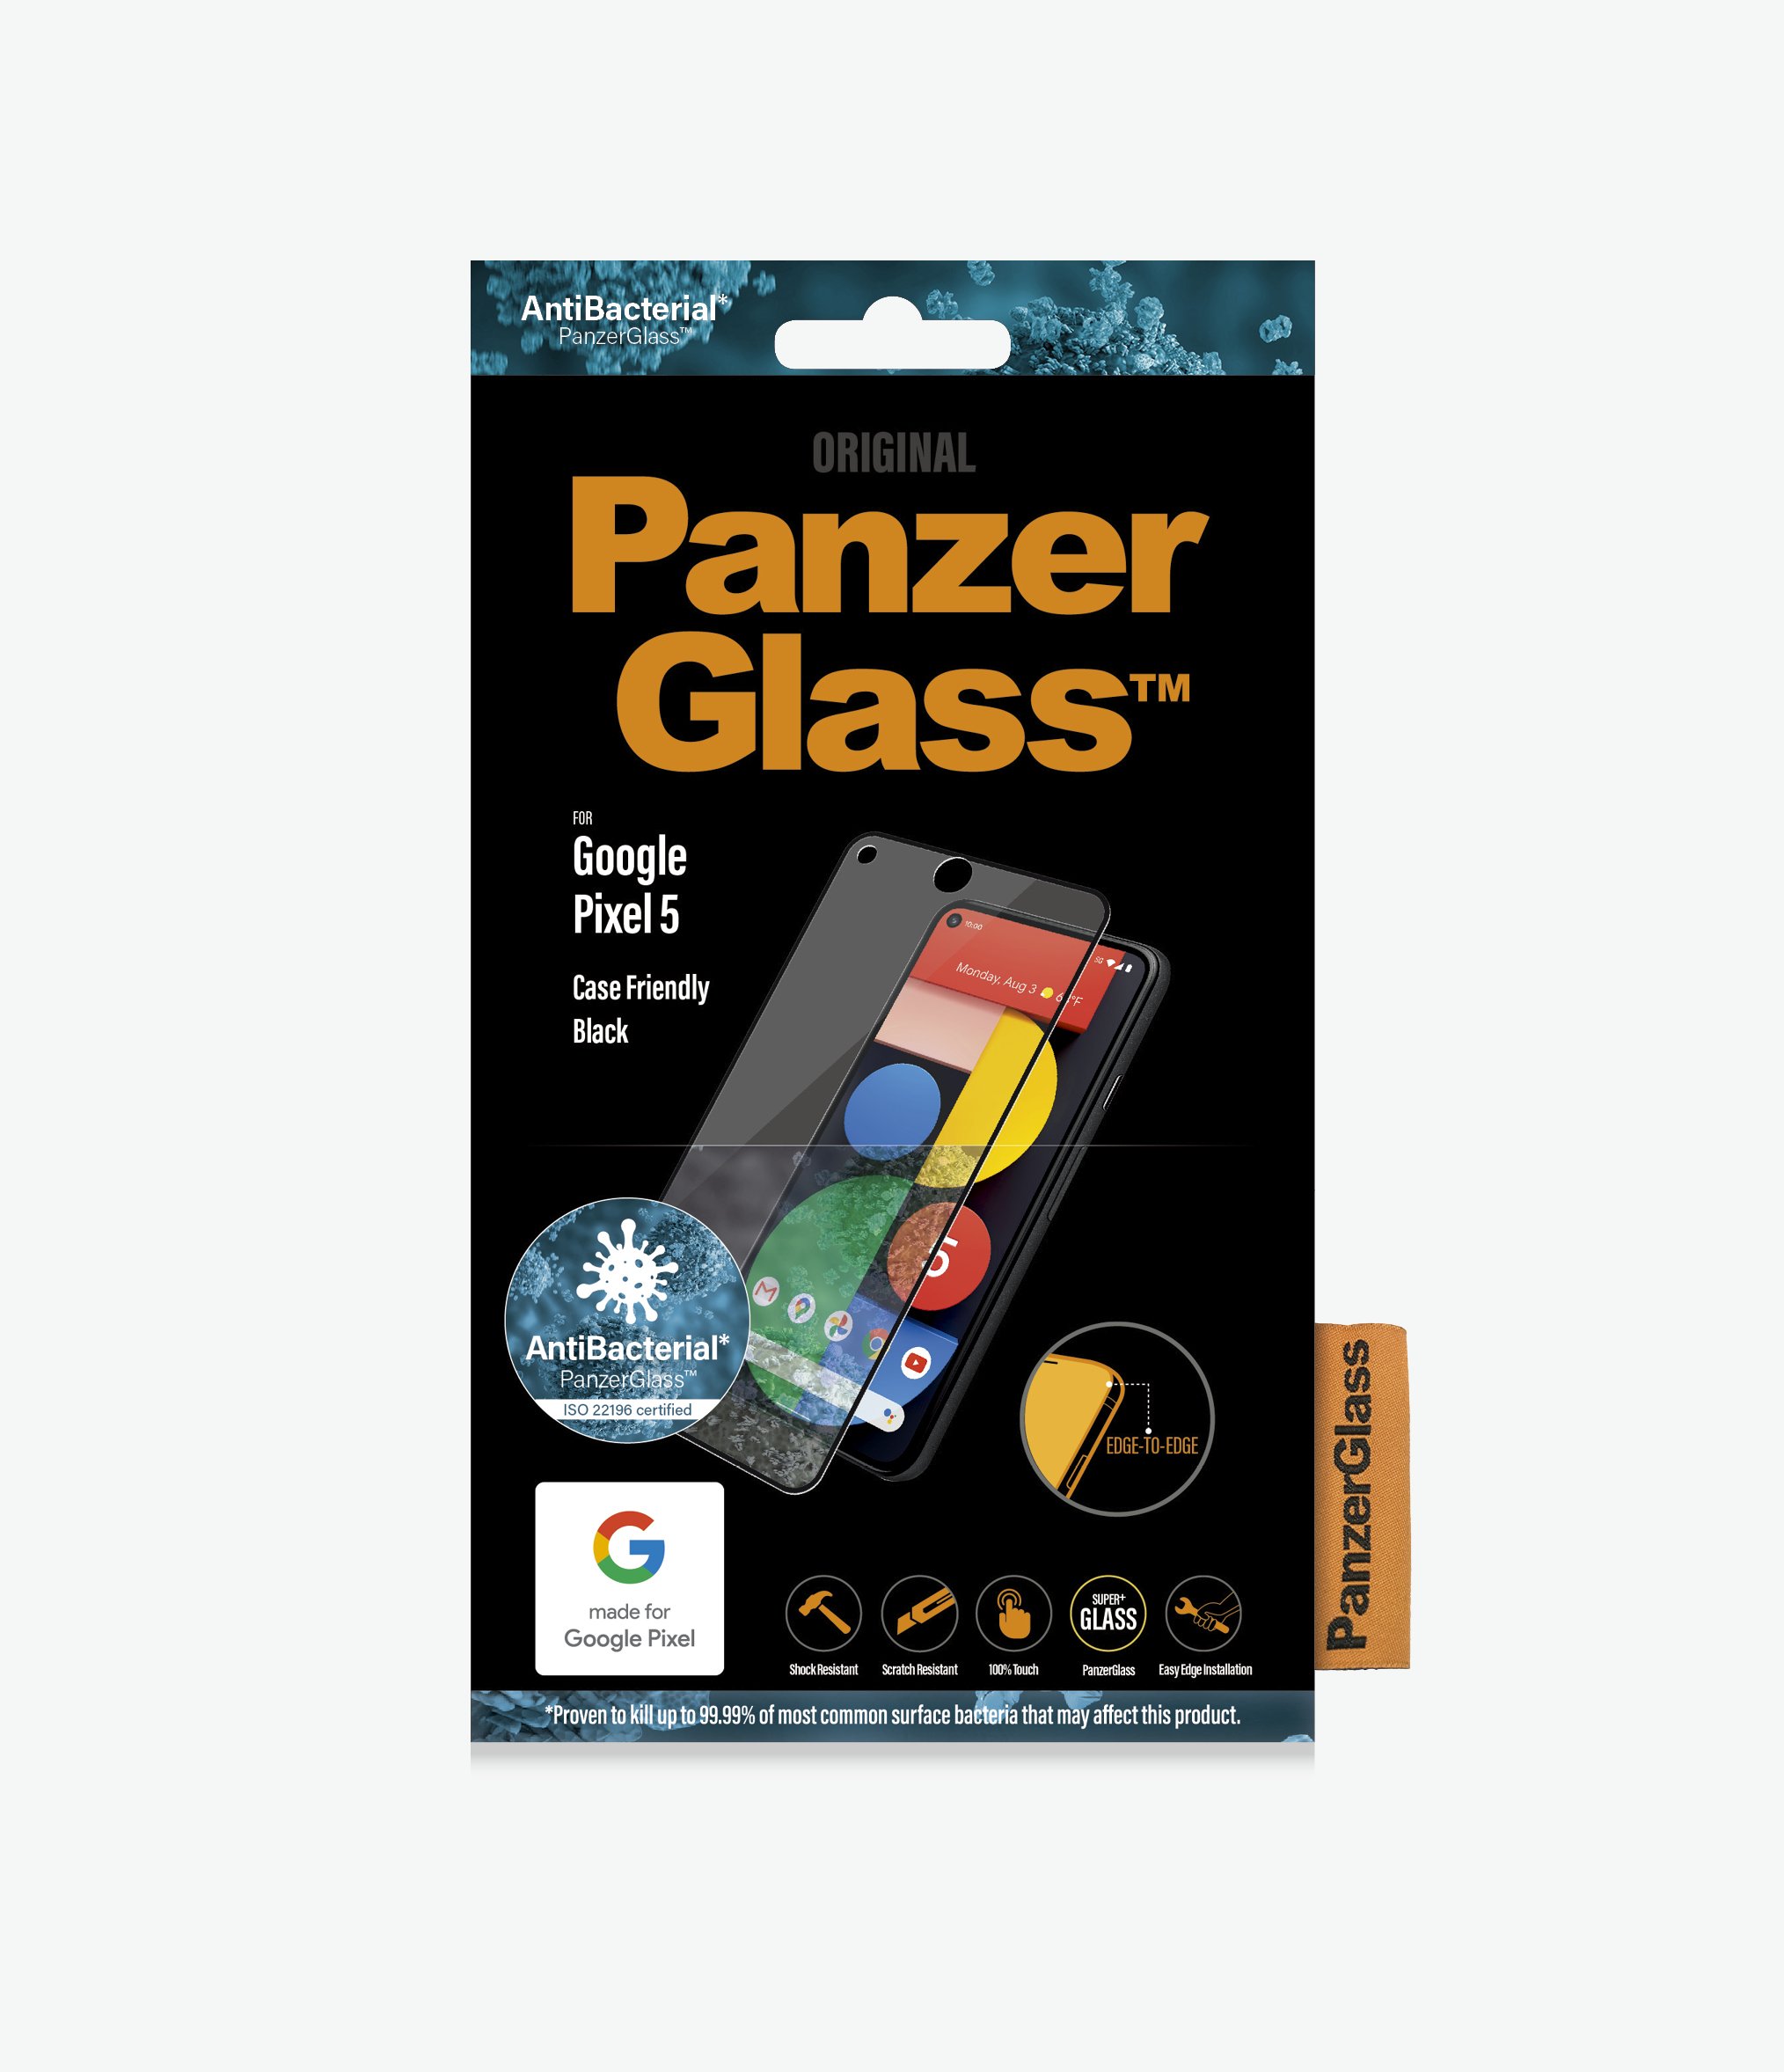 PanzerGlass™ Google Pixel 5 - Anti-microbial (4763) - Screen Protector - Full frame coverage, Rounded edges, Crystal clear, 100% touch preservation